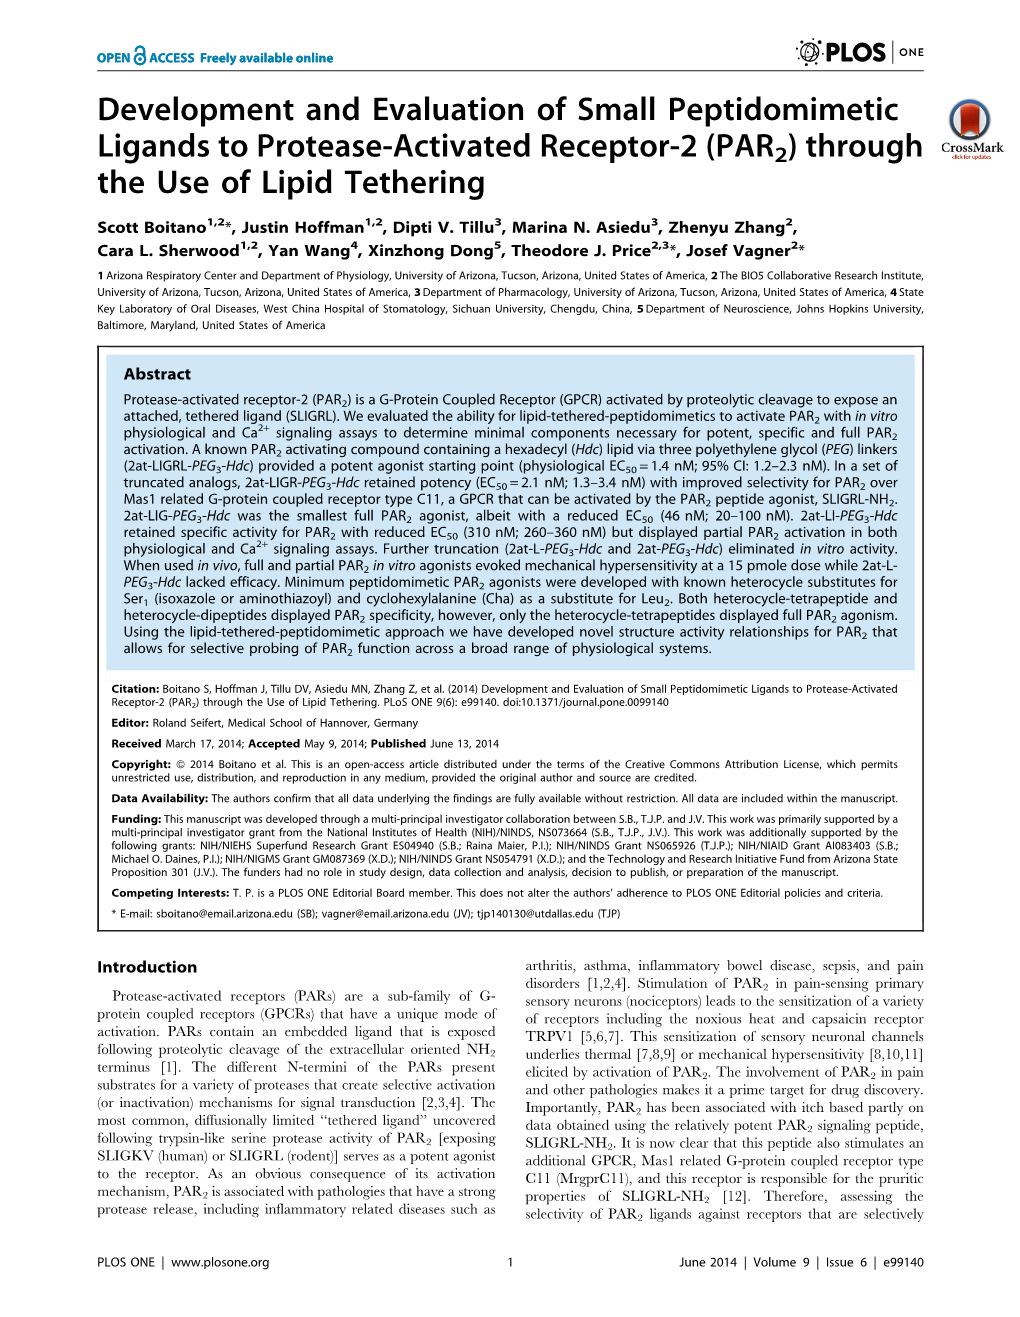 Development and Evaluation of Small Peptidomimetic Ligands to Protease-Activated Receptor-2 (PAR2) Through the Use of Lipid Tethering